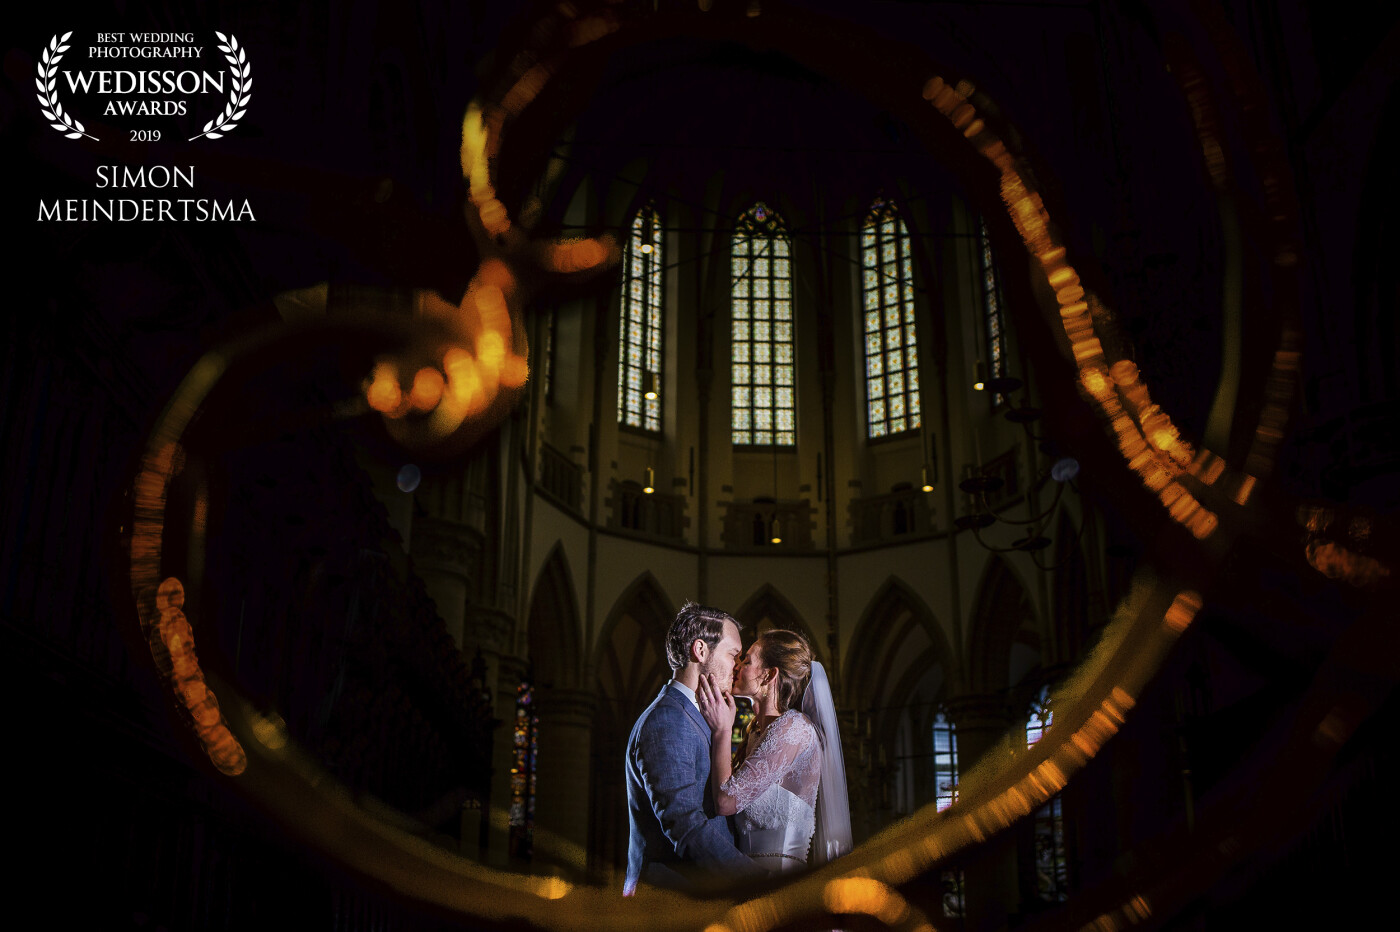 Amazing how you can use a gate in a cathedral as the looks of a heart with some ambient lighting. Add two off camera flashes plus this couple.. And halleluja will sound through this church ;)